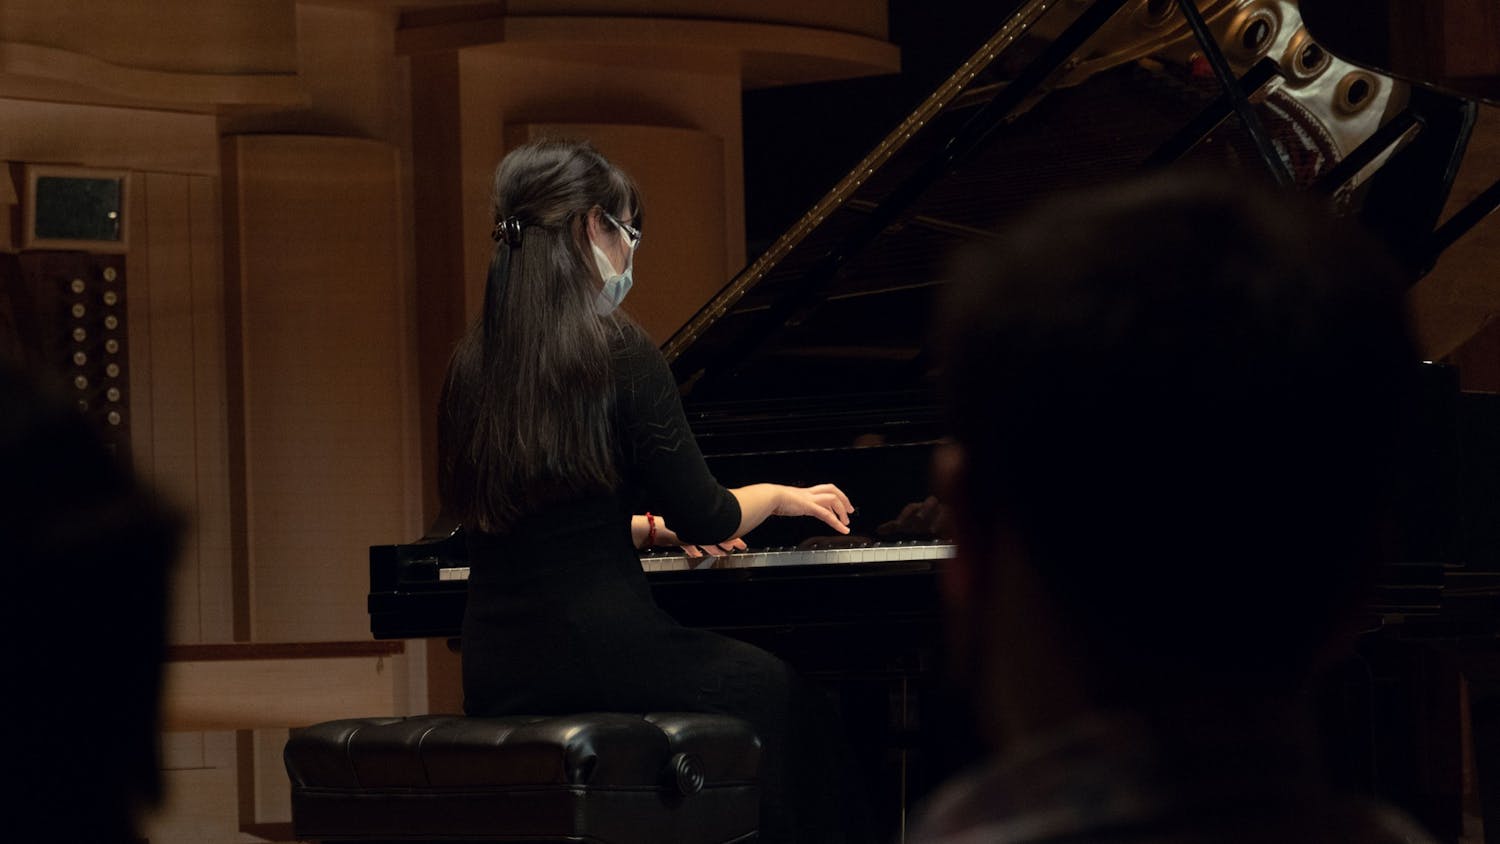 USC School of Music student performs a piano art song during the "Together: A celebration of Asian and Pacific Islander Communities" concert on March 15, 2022. &nbsp;The concert focused on the celebrating and showcasing works from Asian and Pacific Islander composers in recognition of the lives lost on March 16, 2021.